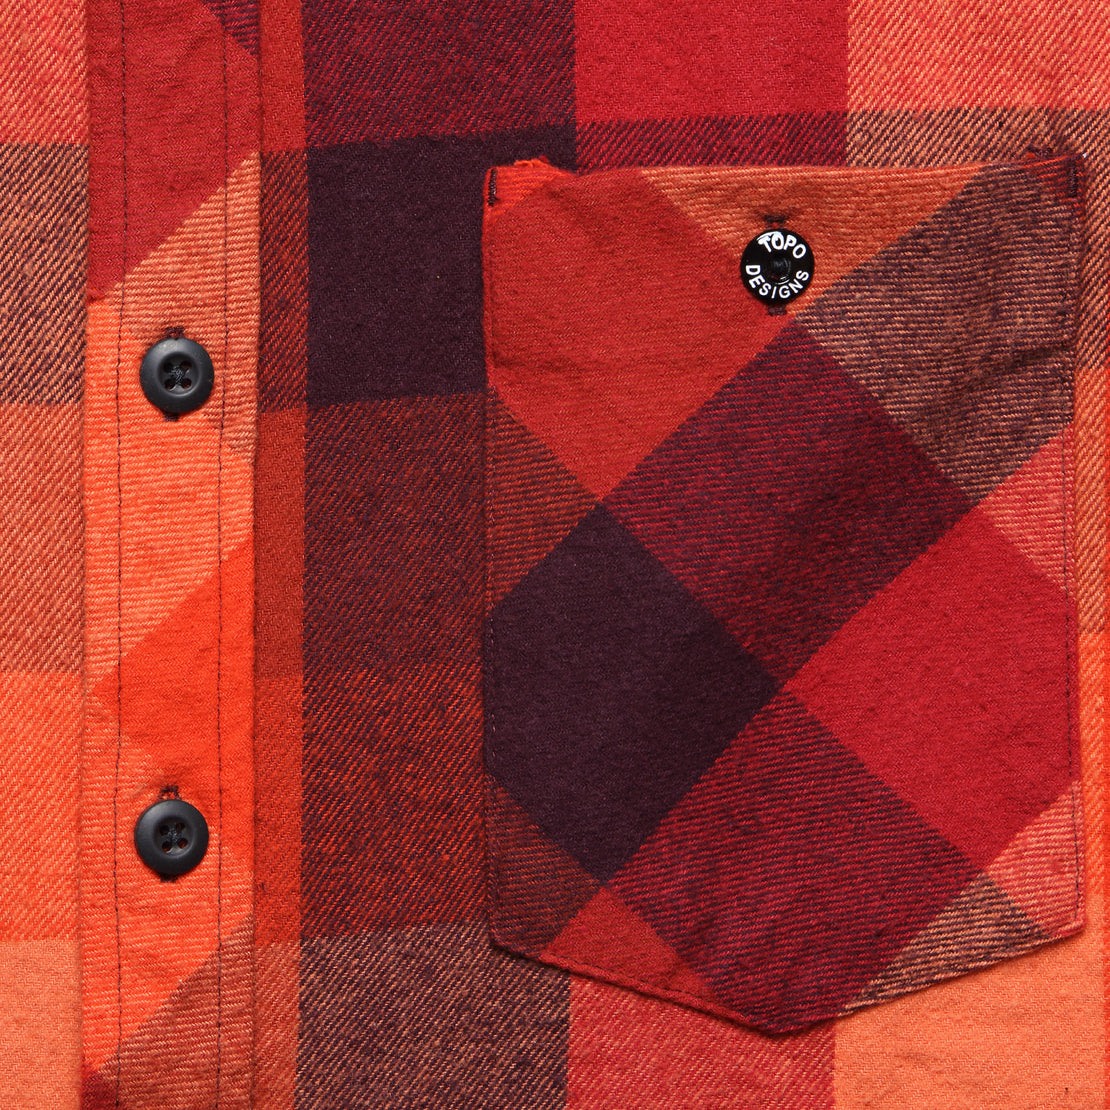 Plaid Workshirt - Red/Maroon - Topo Designs - STAG Provisions - Tops - L/S Woven - Plaid